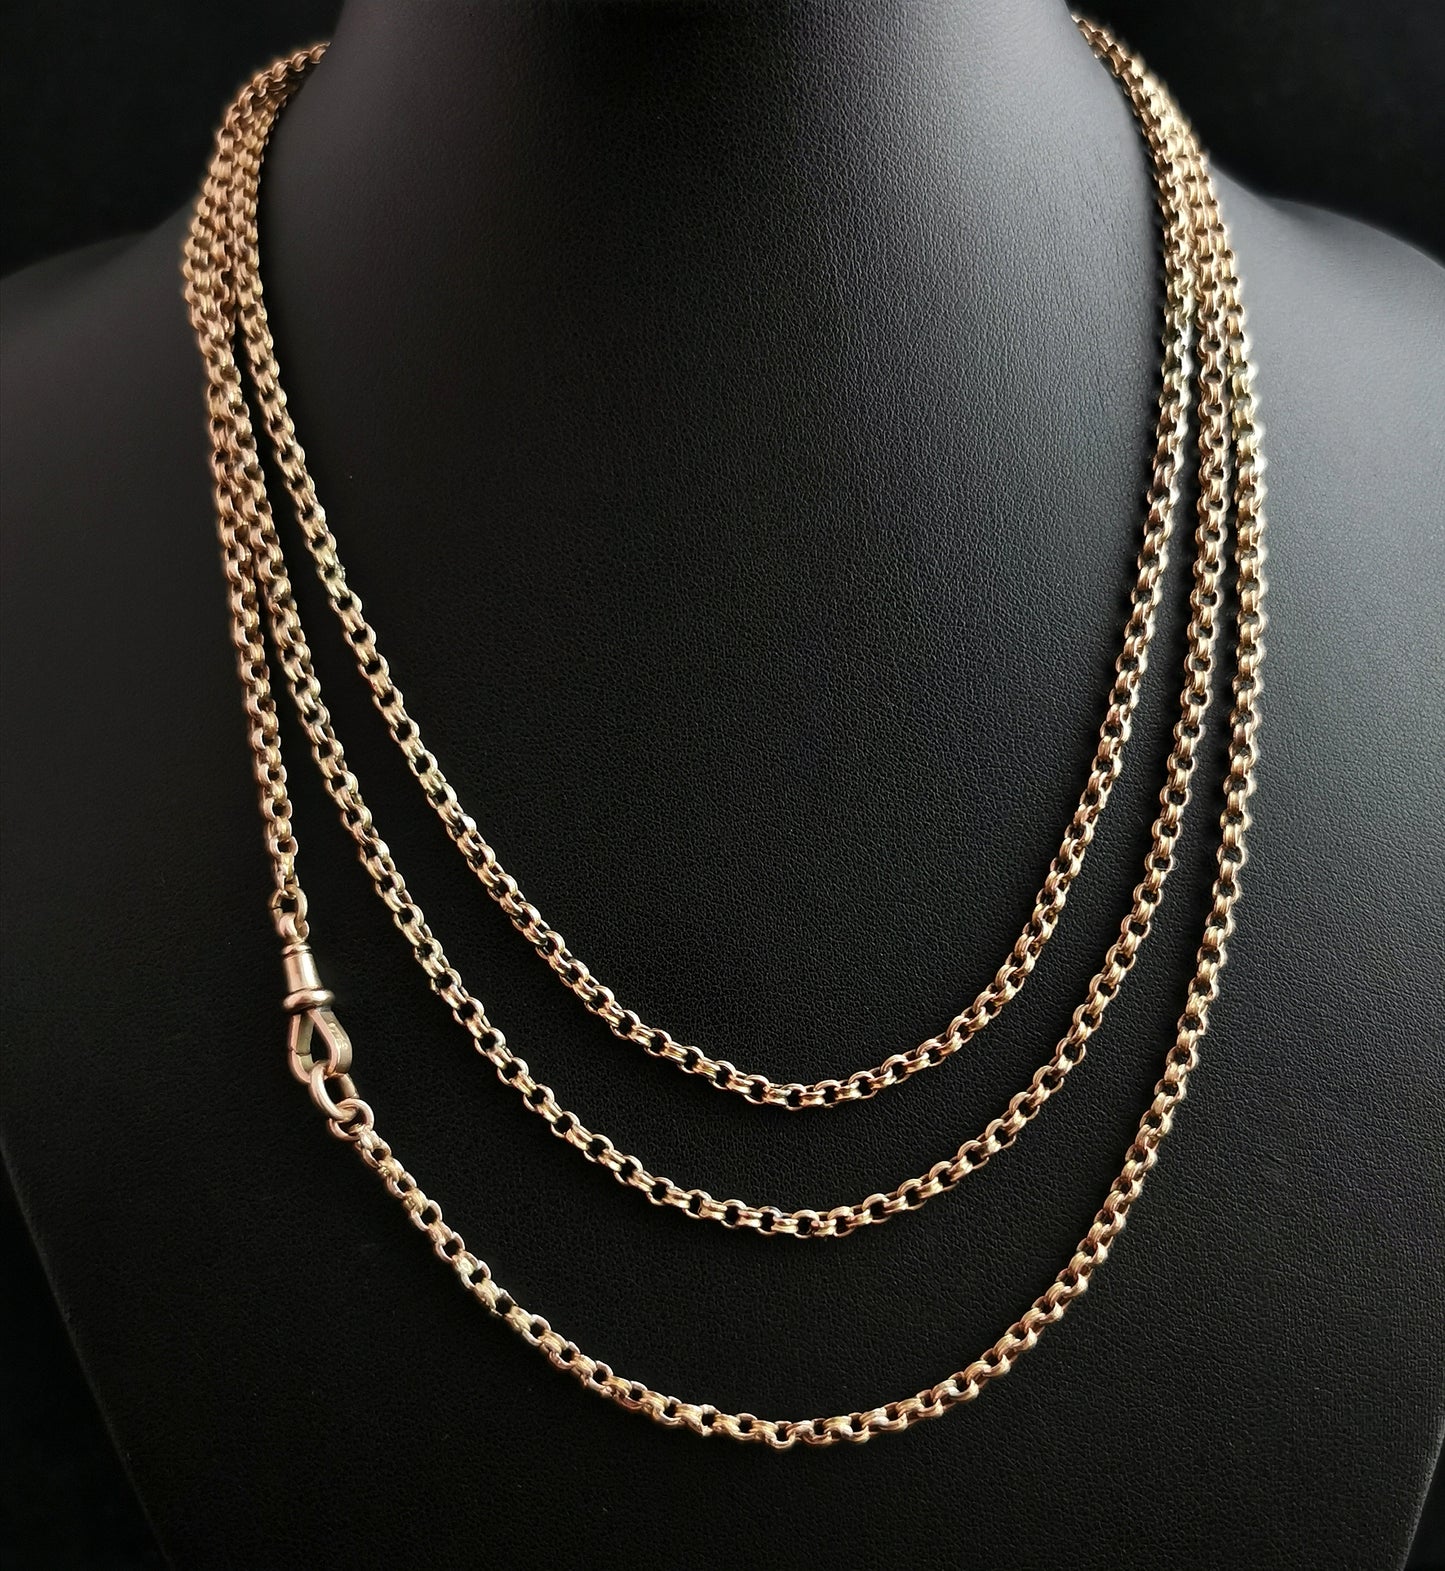 Antique 9ct gold longuard chain necklace, muff chain, rolo link